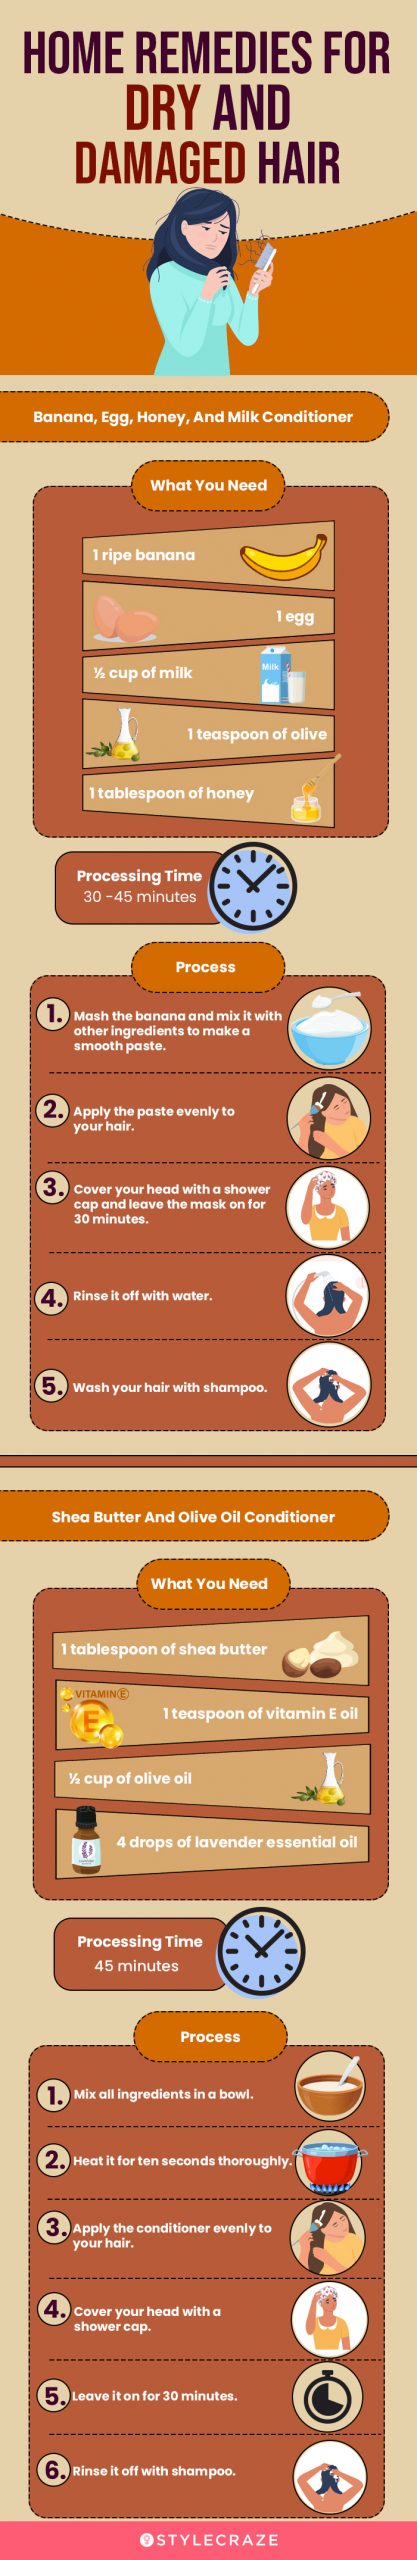 home remedies for dry and damaged hair [infographic]